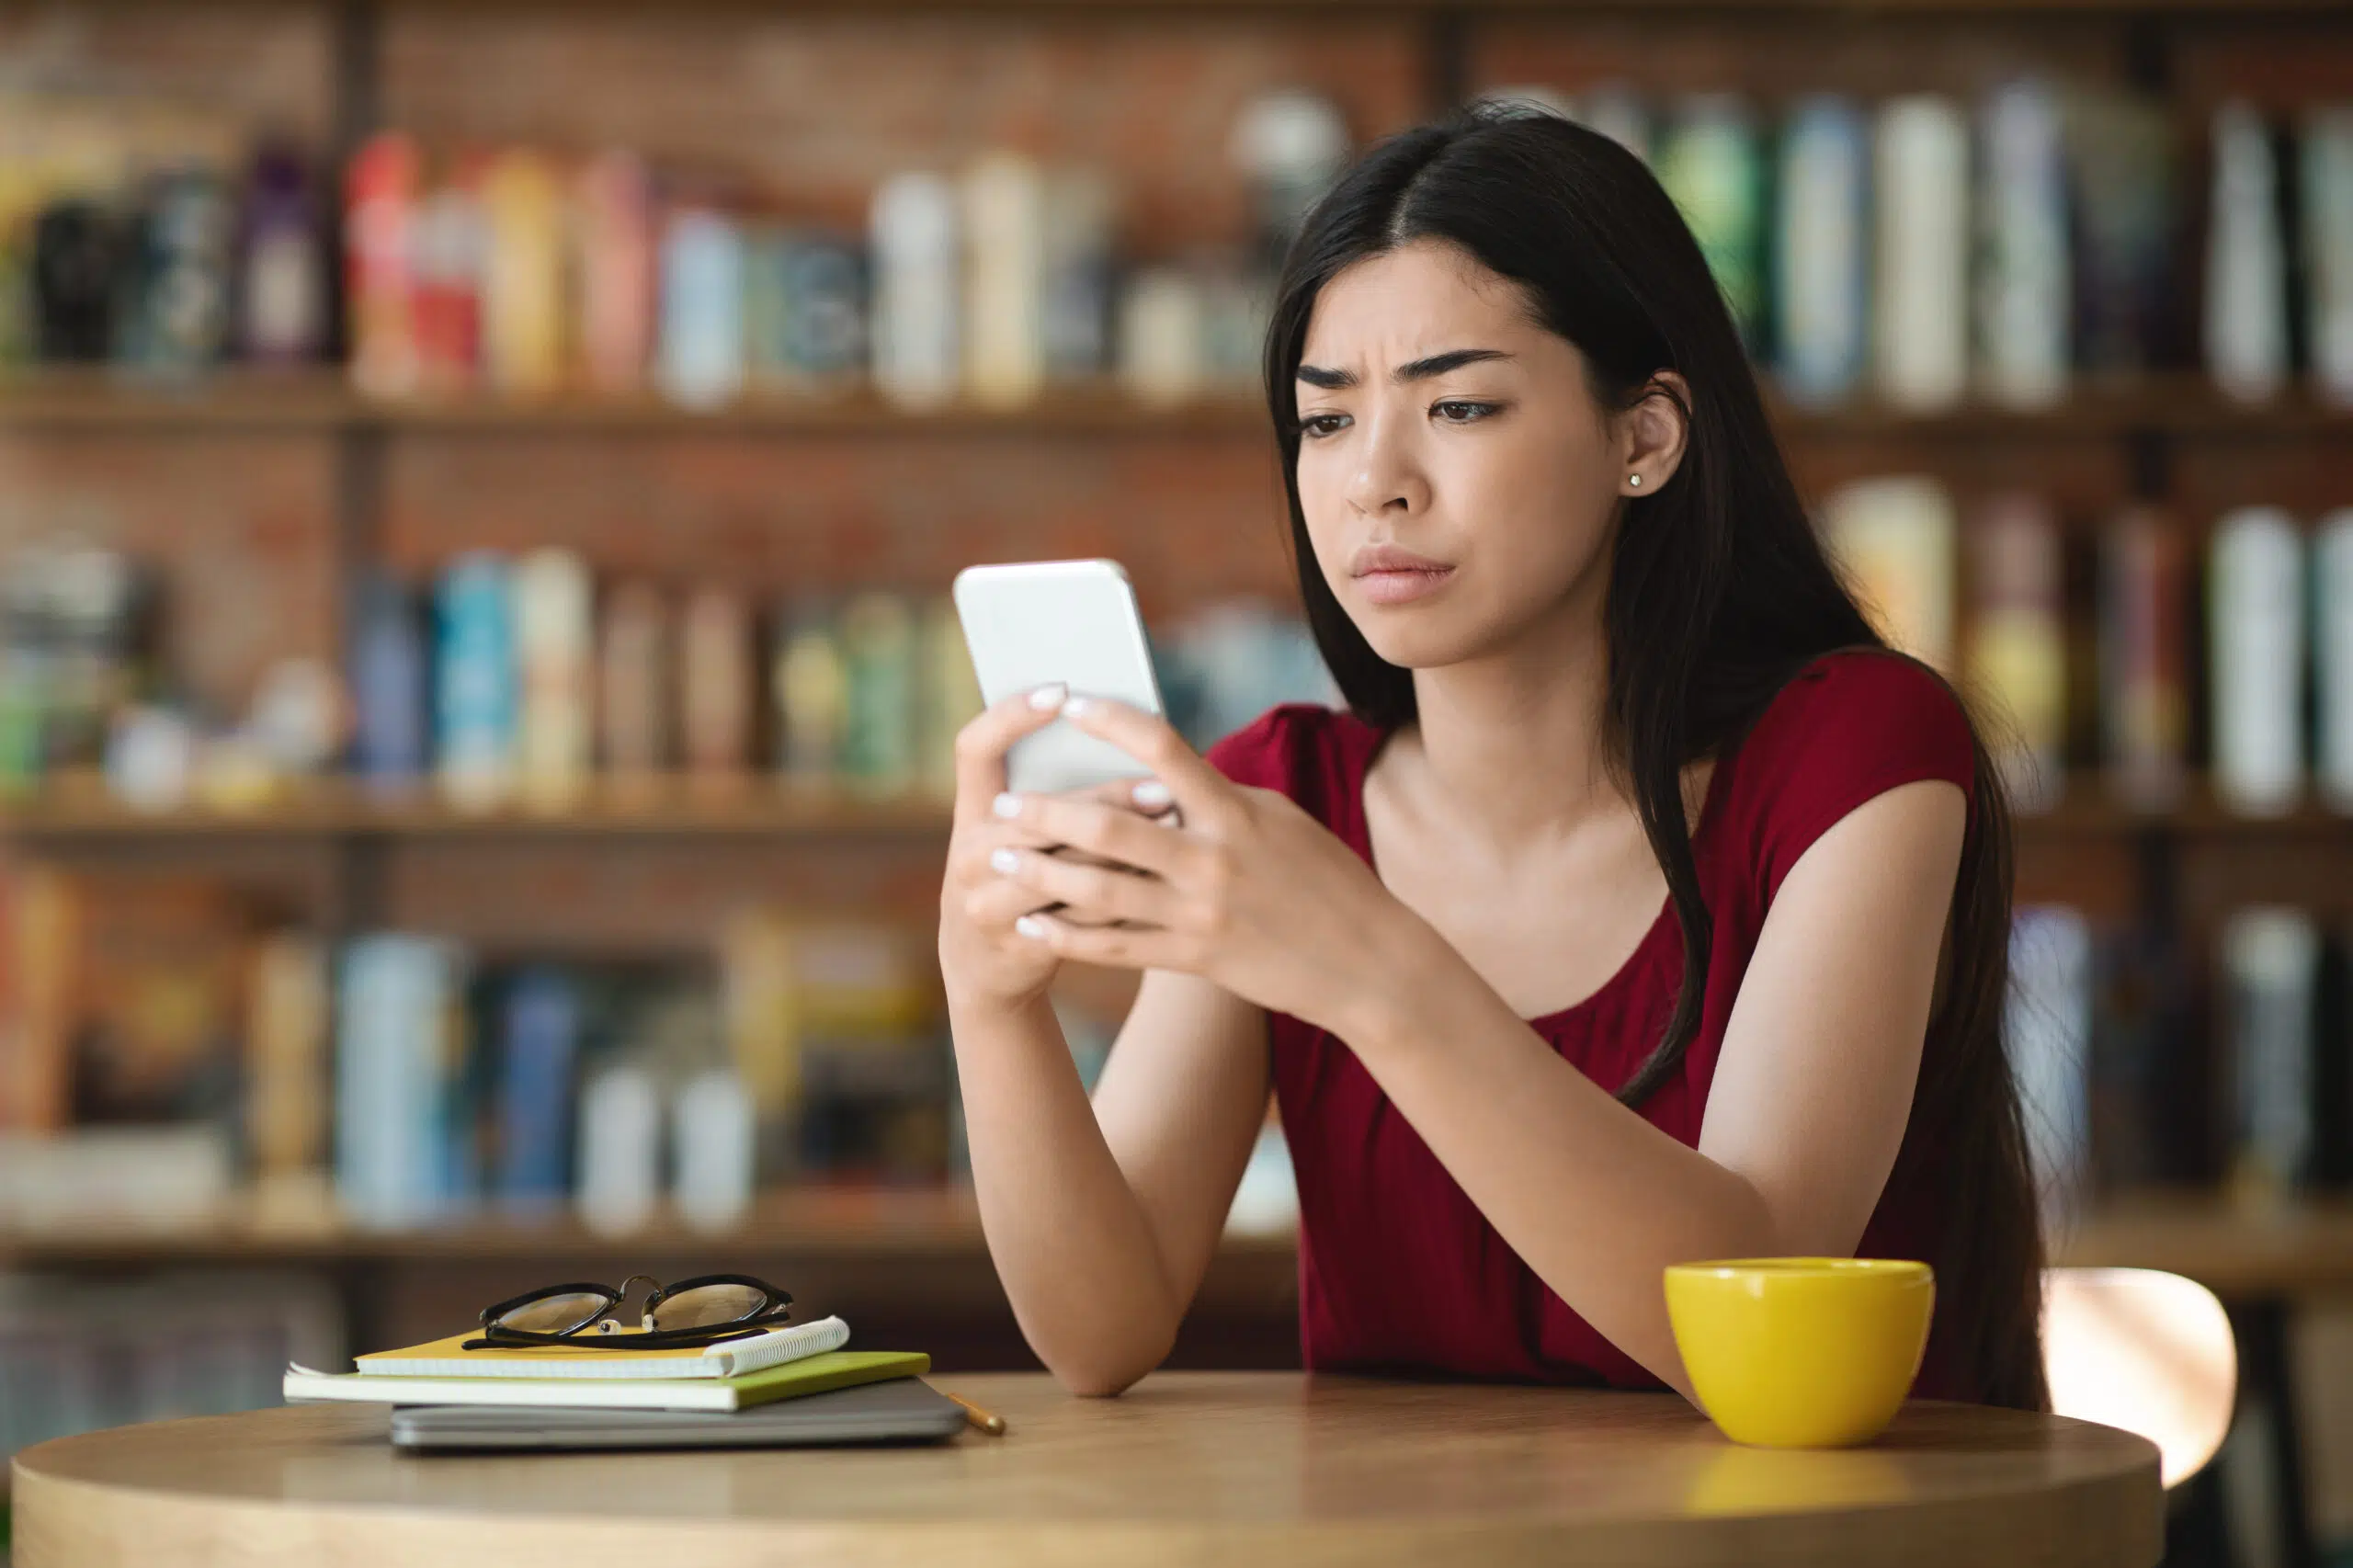 Bad News. Upset Asian Girl Looking At Smartphone Screen In Cafe, Reading Message